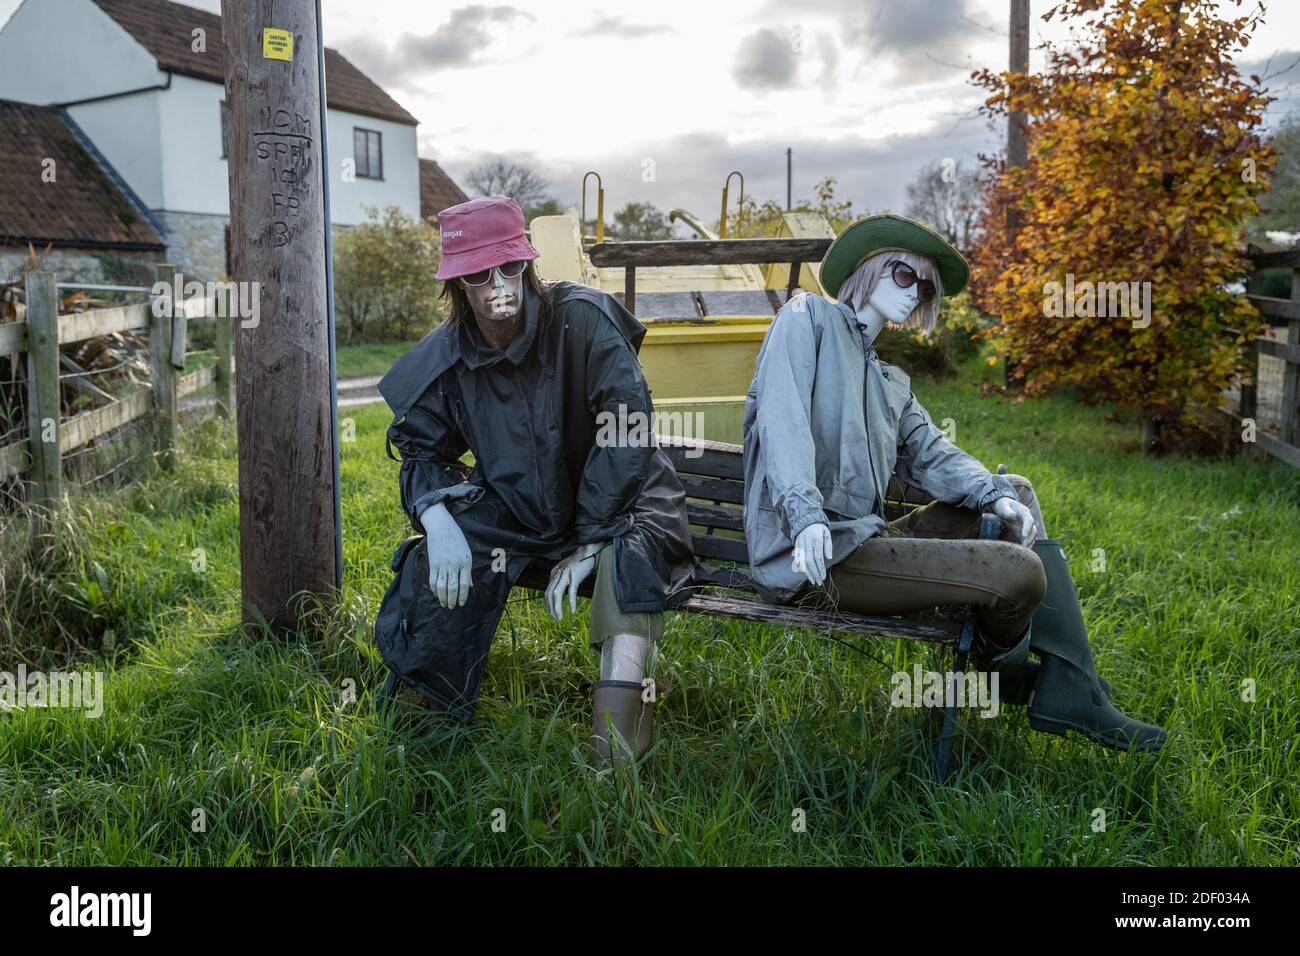 Coronavirus: Lockdown scarecrow characters bring some local homemade humour to the town of Marston Magna in Somerset, UK. Stock Photo